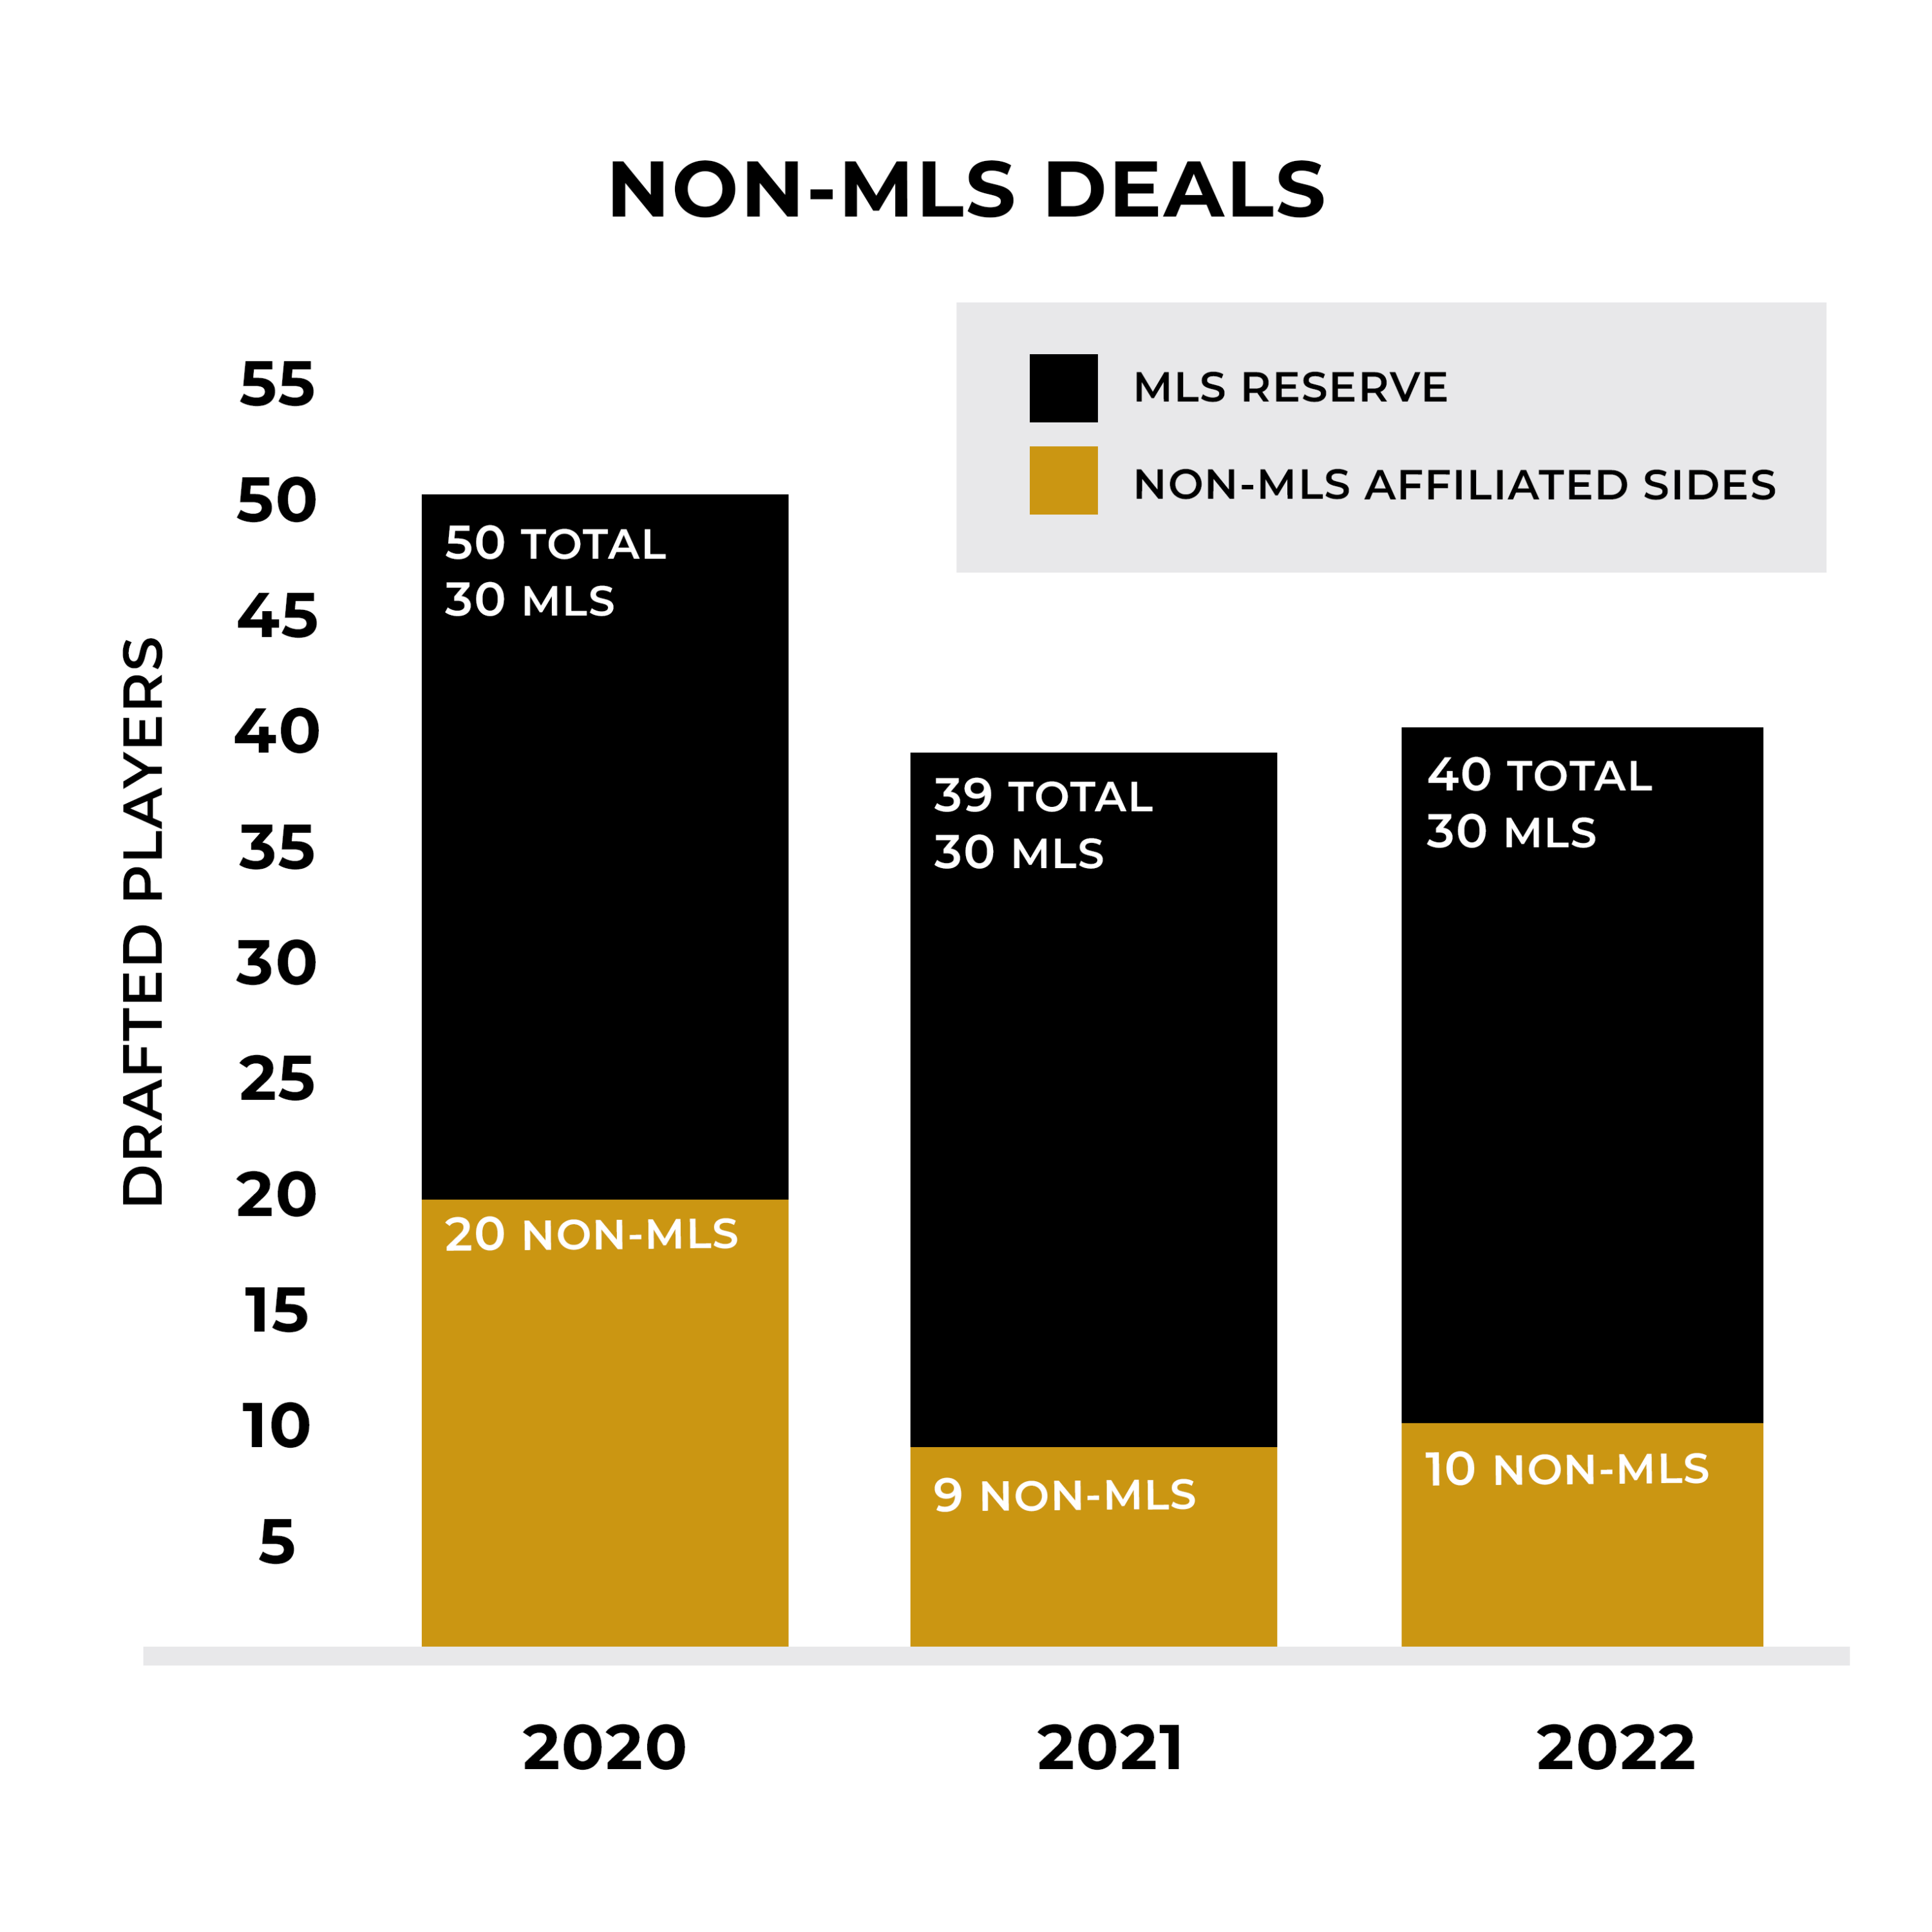 MLS draft brings more competition for player agents